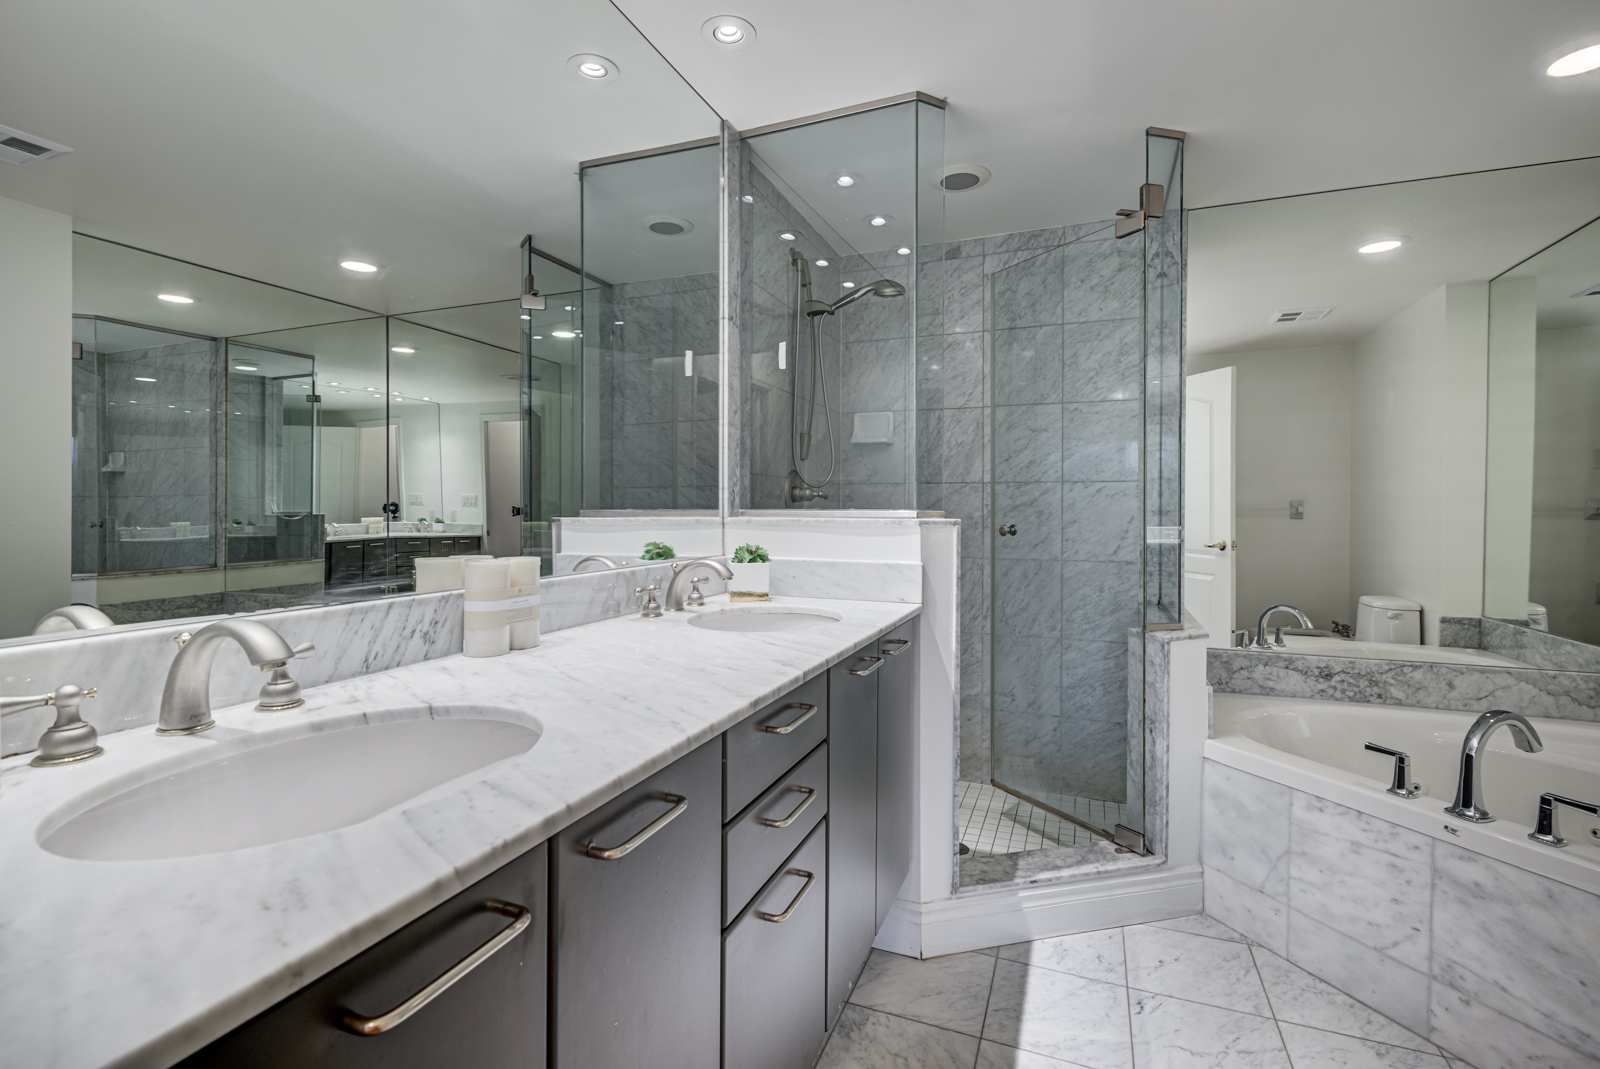 Gorgeous master bath with marble tiles, tub, 2 sinks, walk-in shower of 77 Mcmurrich St Unit 308.